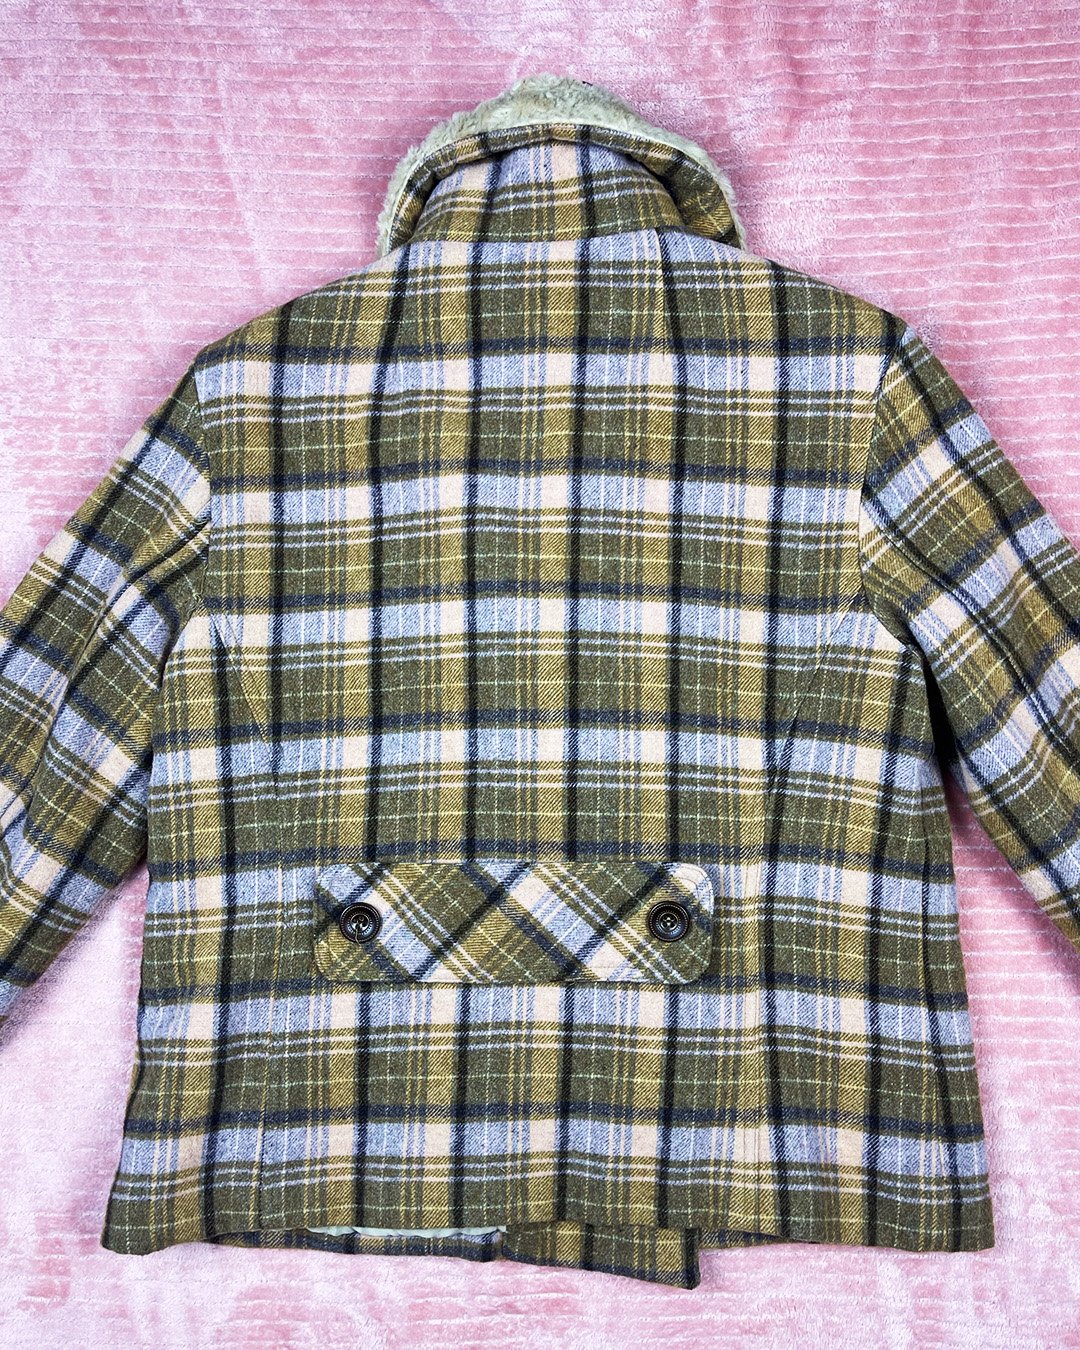 L - Wool Collared Black and Yellow Plaid Jacket